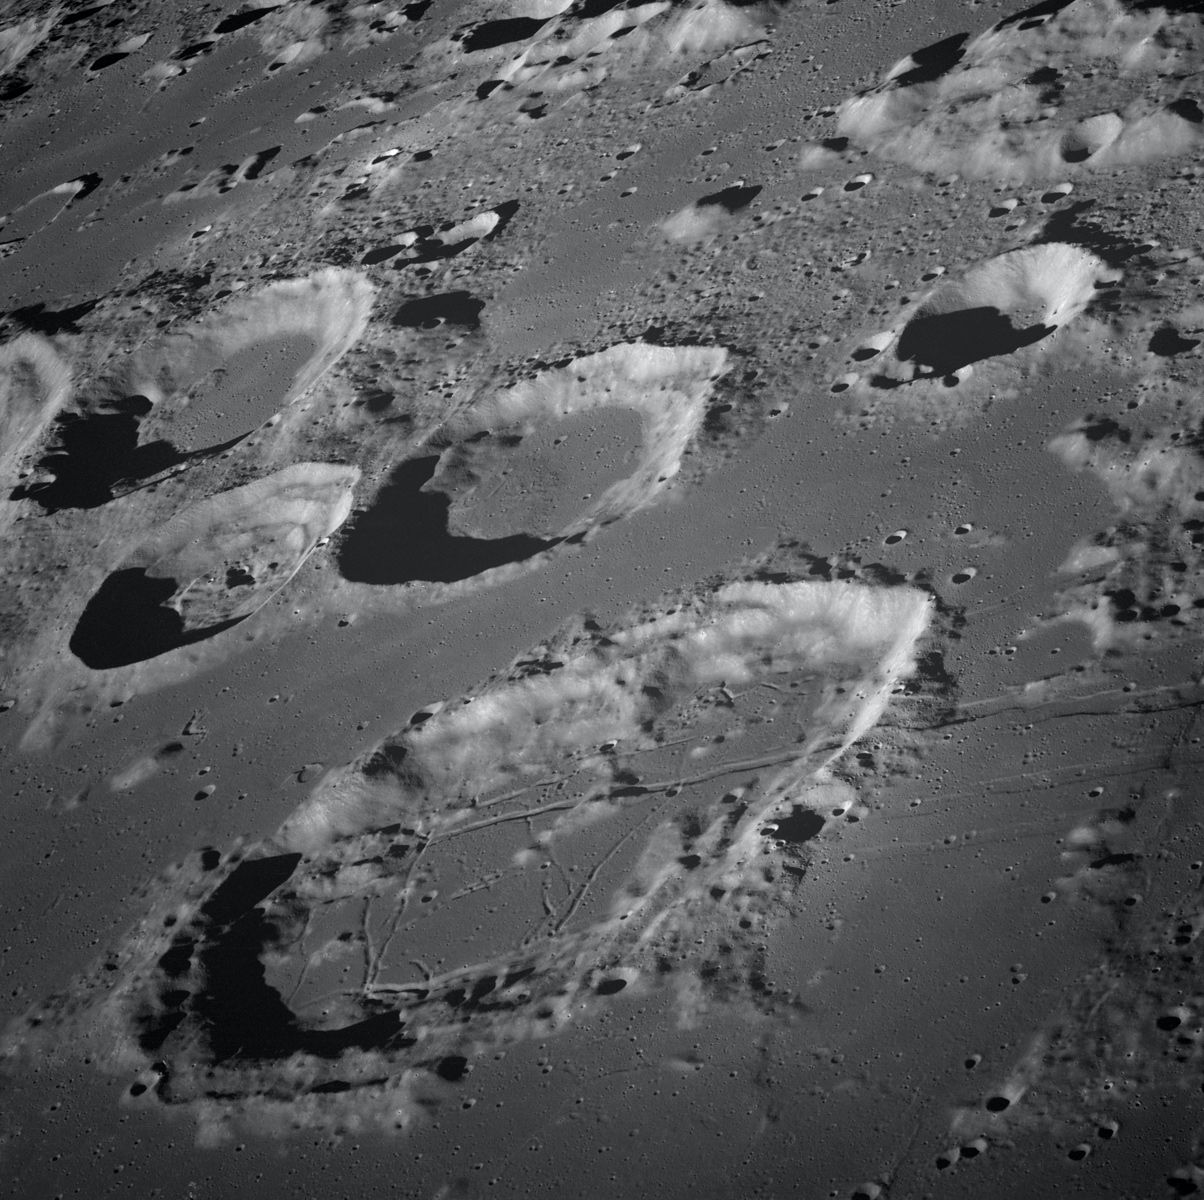 Craters on the Moon, seen from a low oblique angle. The floor of a large foreground crater has fracture-like patterns.